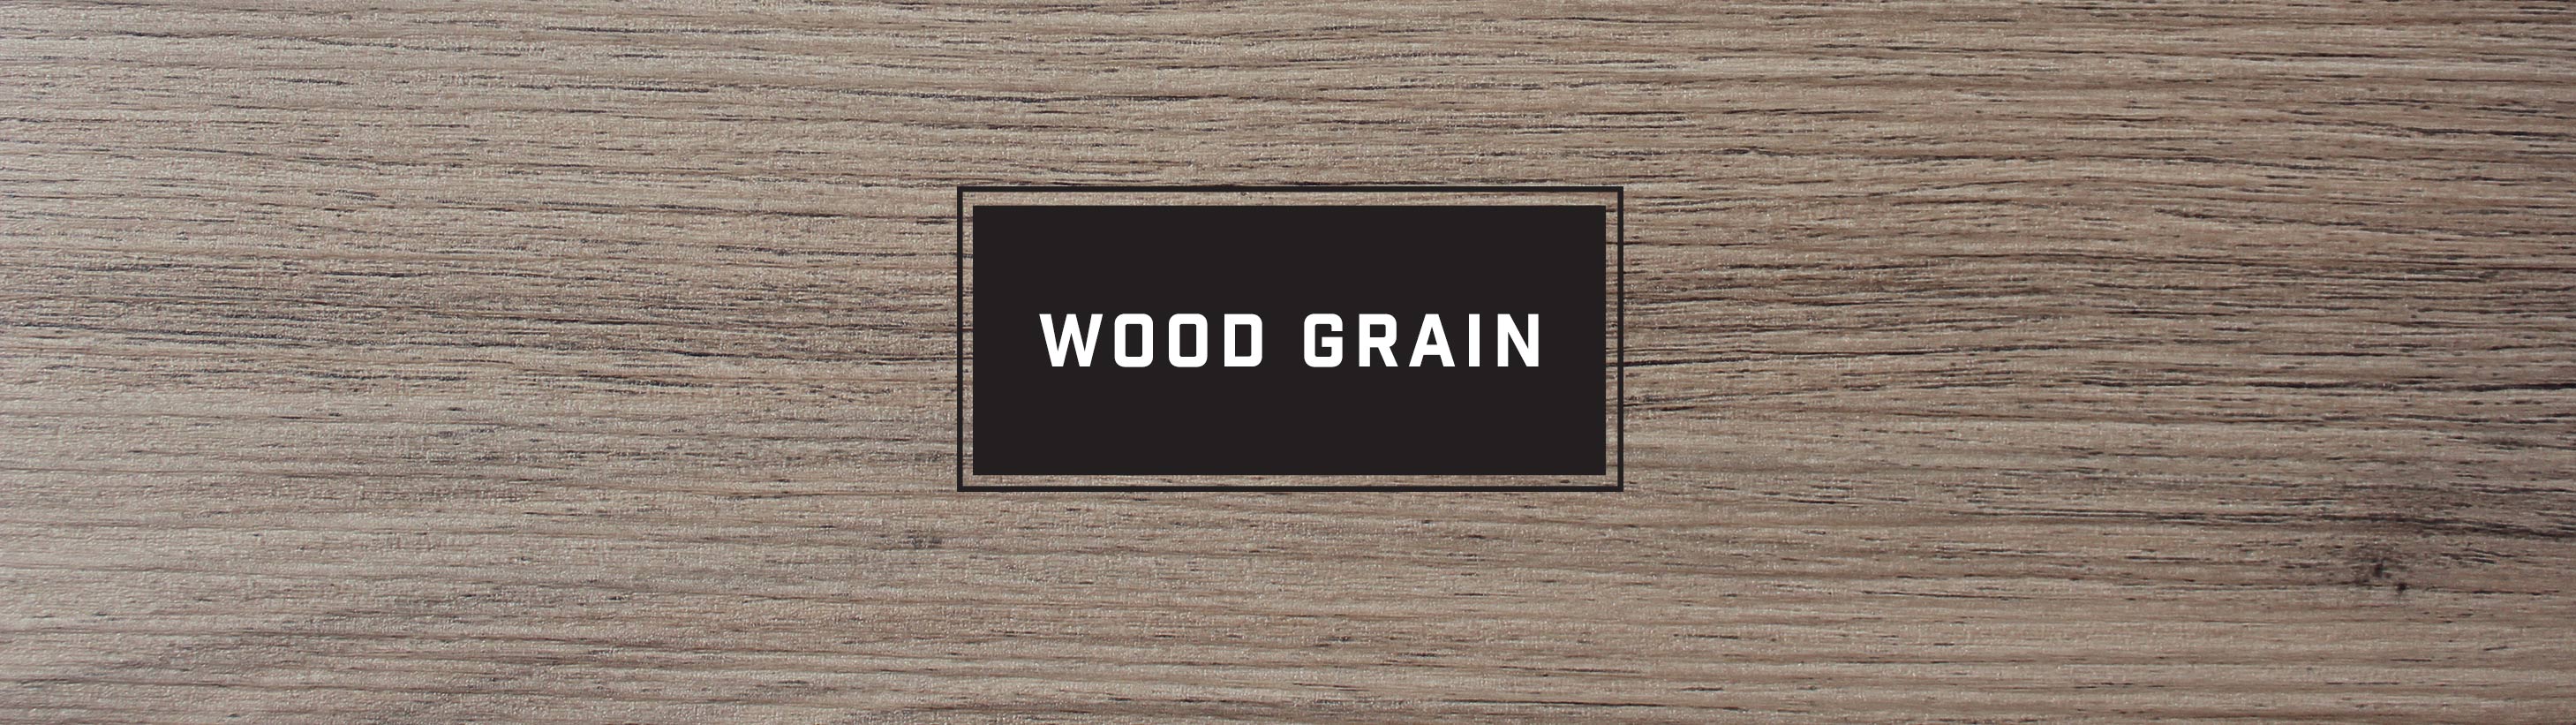 Featured Product: Wood Grain